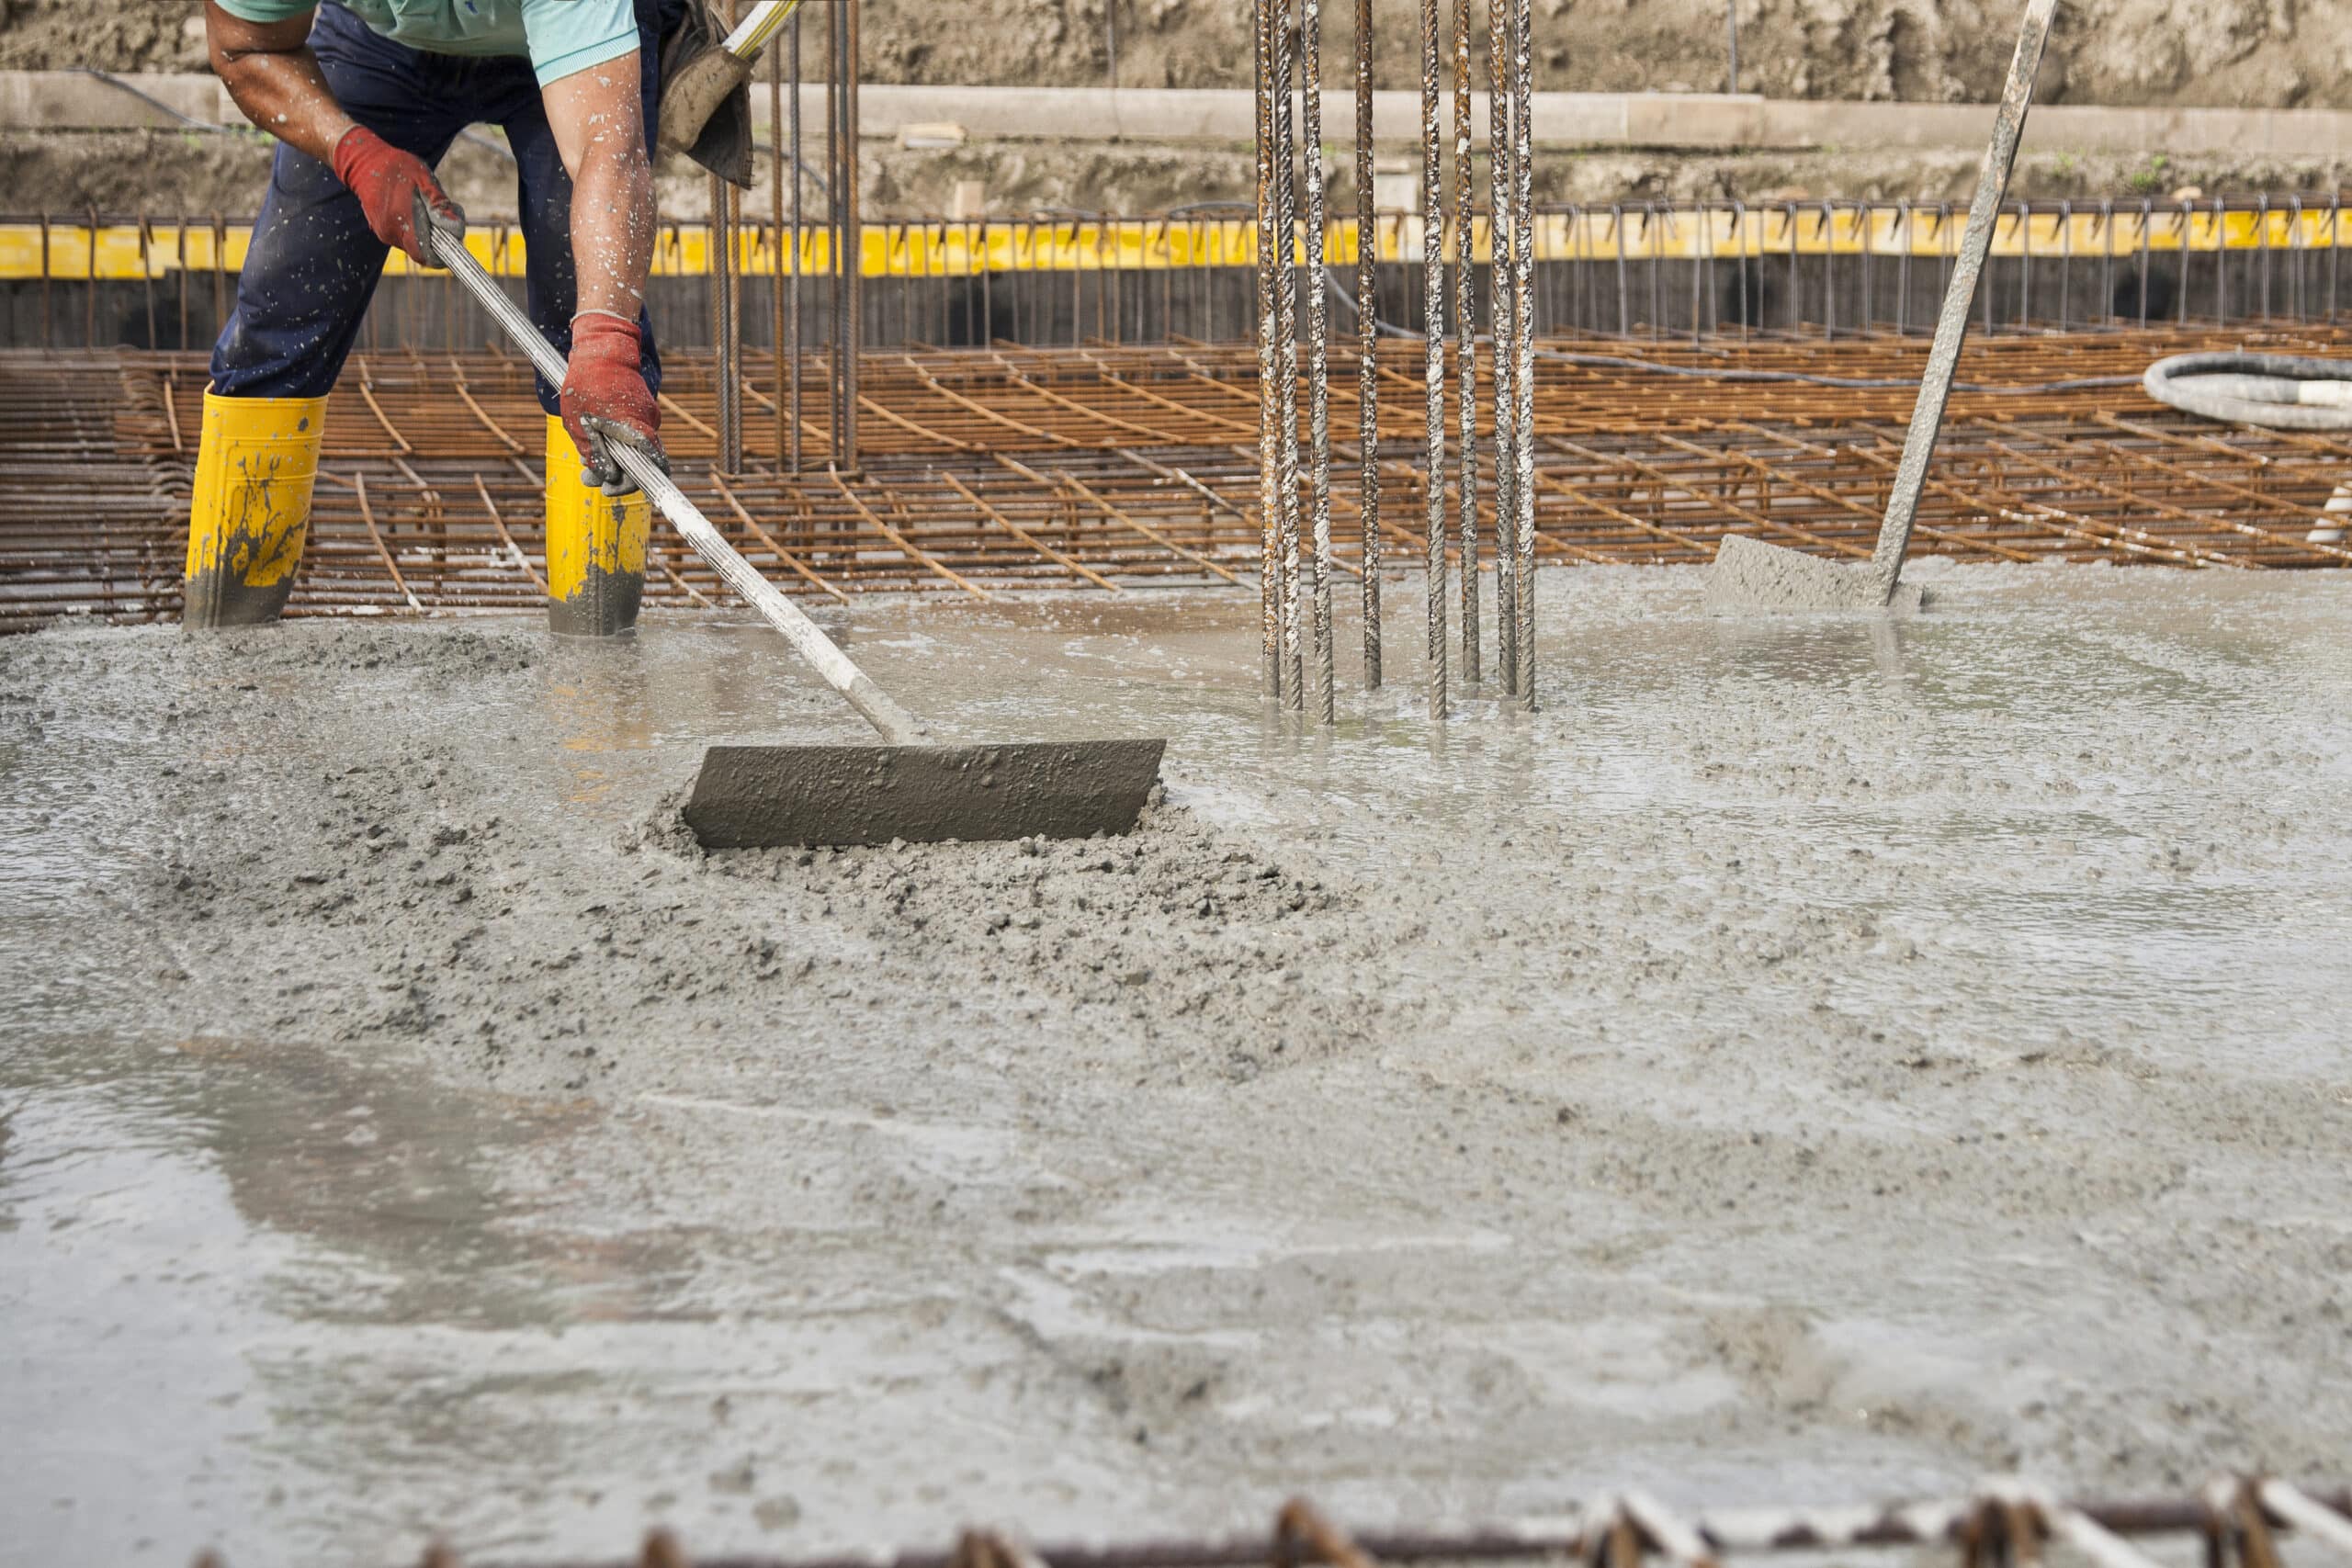 A construction worker smoothing foundation cement at building site, highlighting importance of proper foundation for construction.